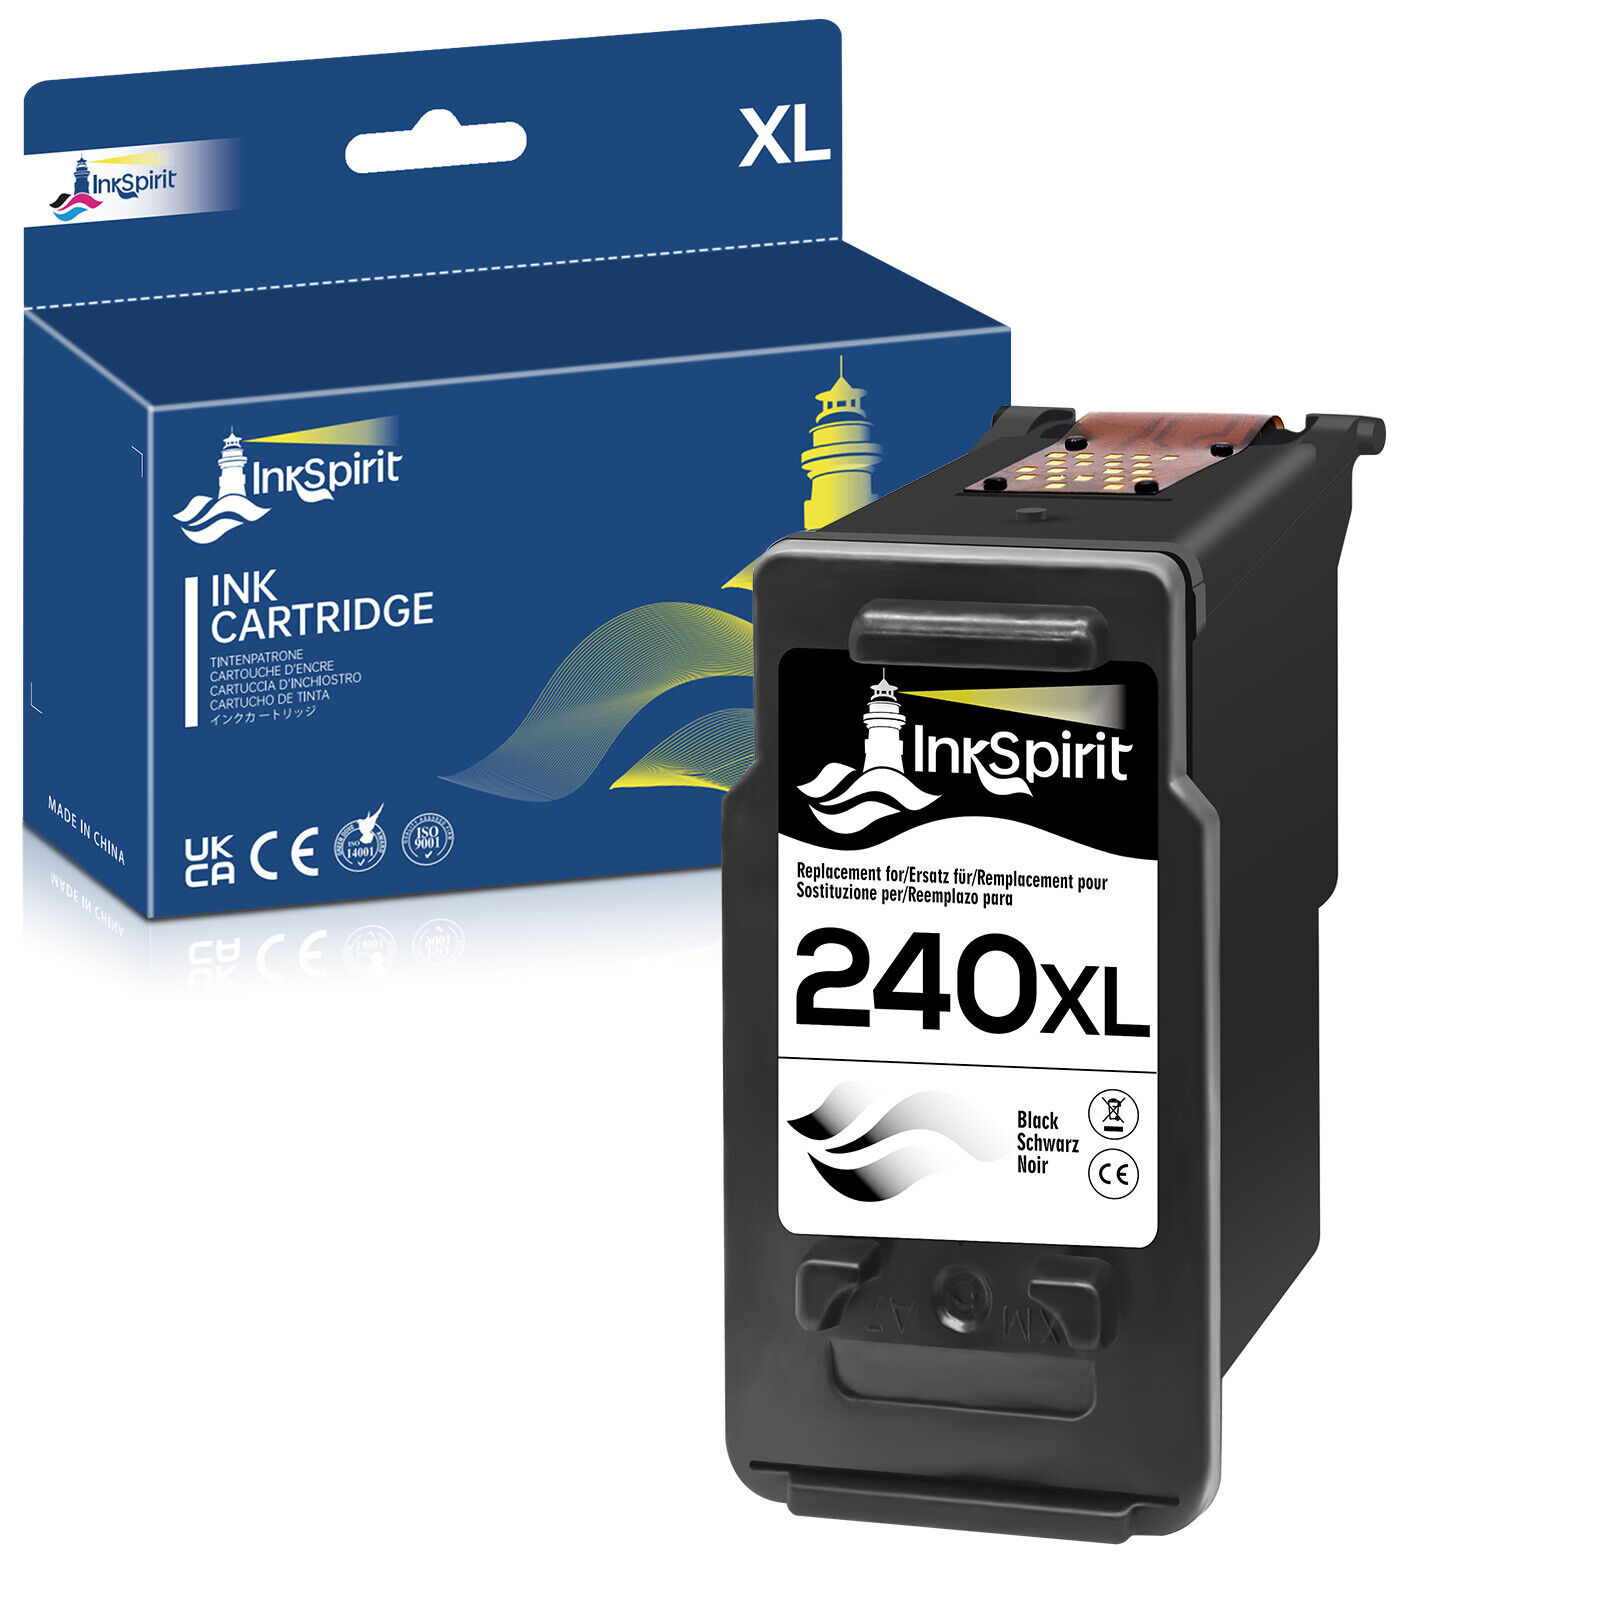 Ink Replacement for Canon PG-240XL CL-241XL XXL PIXMA MG3520 MG3220 MG3620 MX392